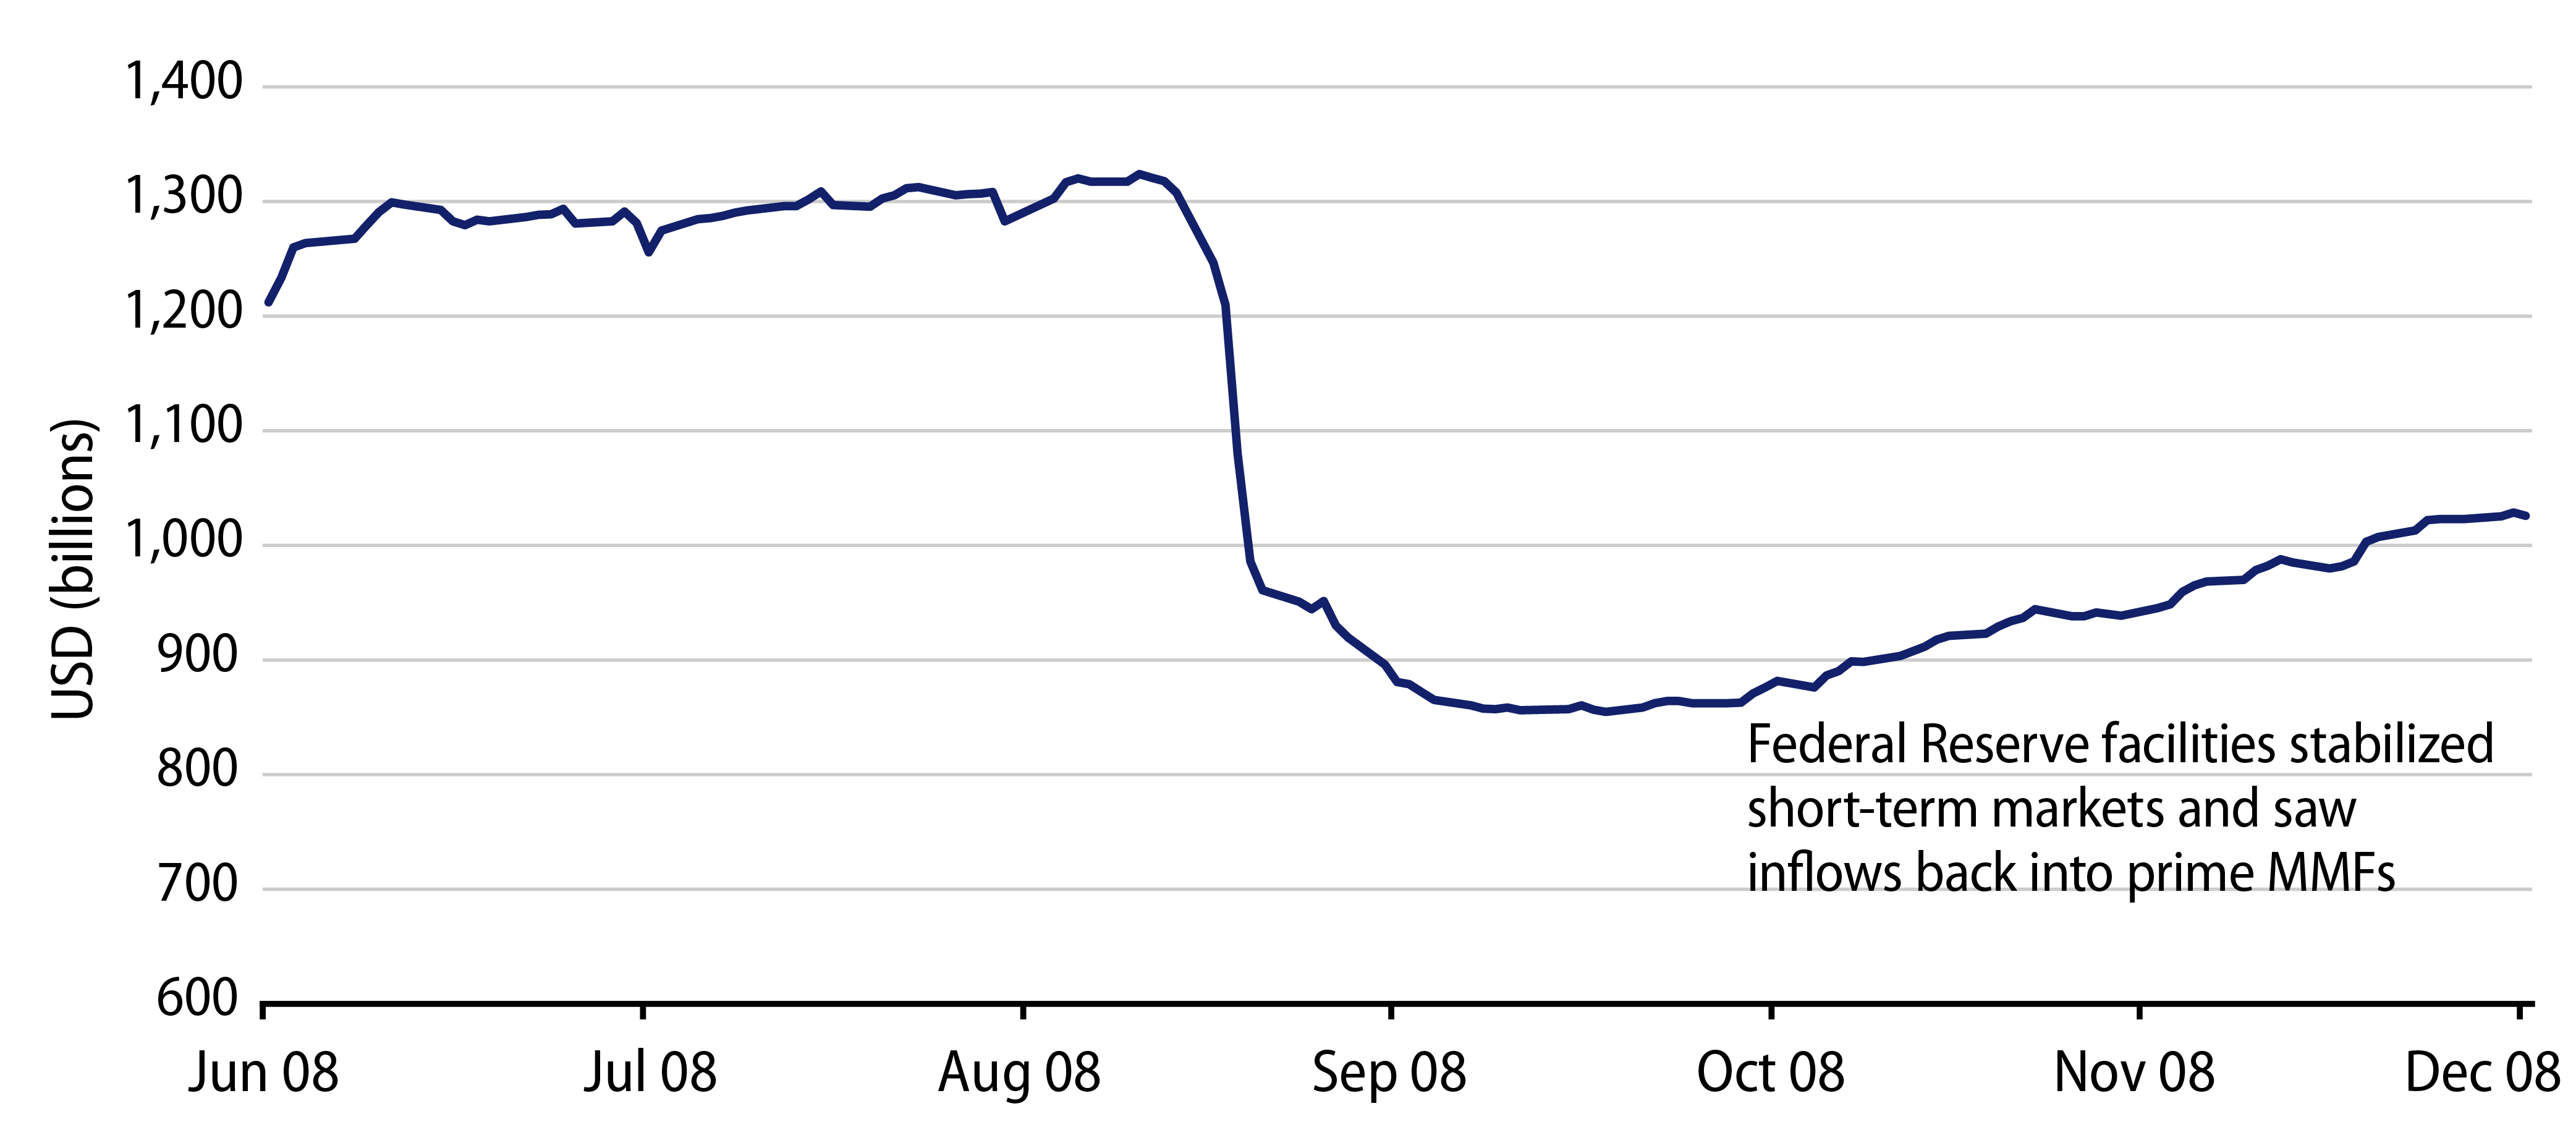 Institutional Prime MMF Outflows ($ Billions)—Impact of Lehman Bankruptcy in September 2008